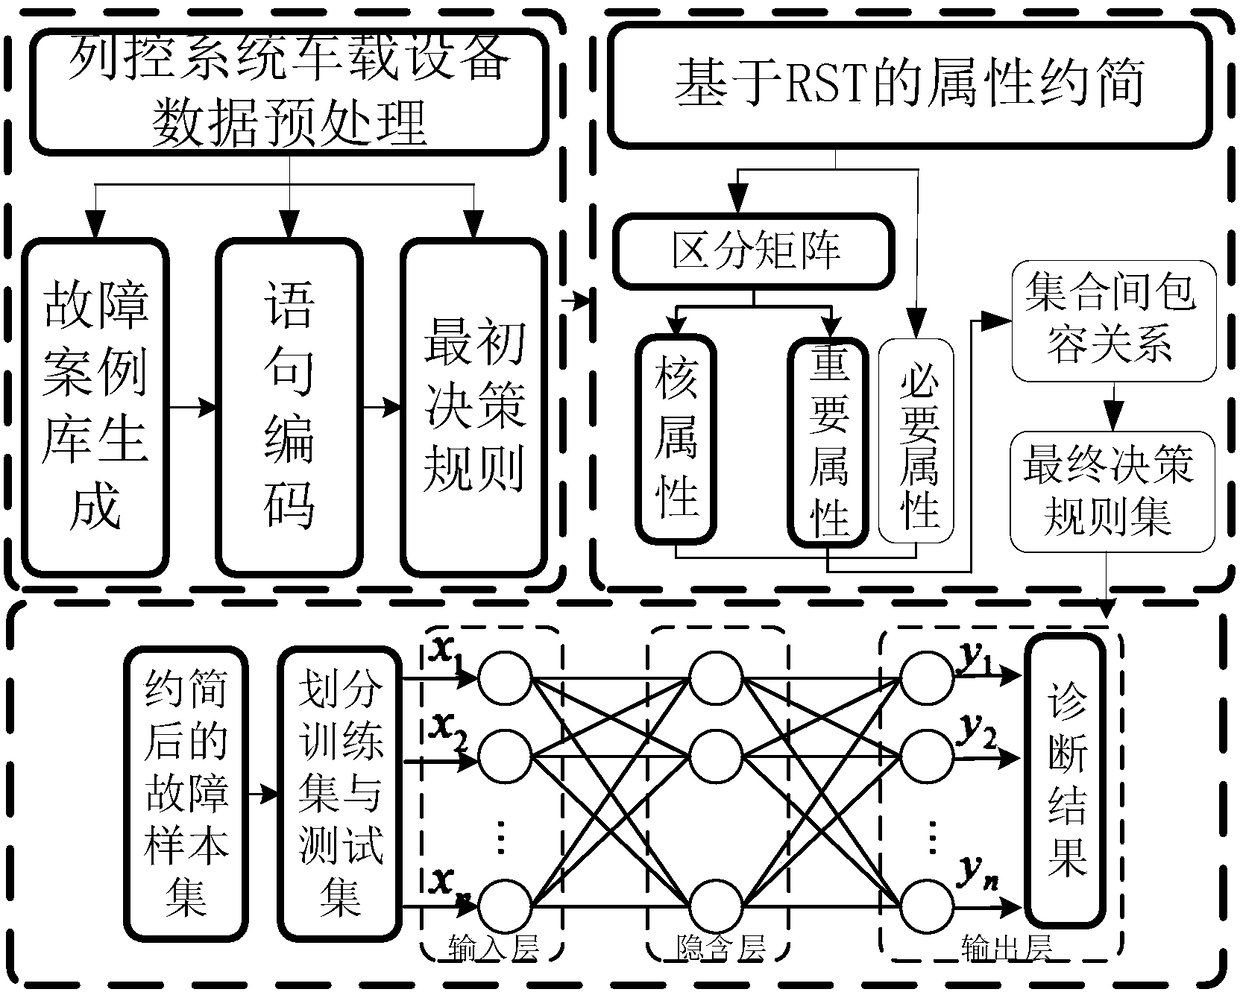 Train control onboard device fault classification and recognition method based on rough set-neural network model